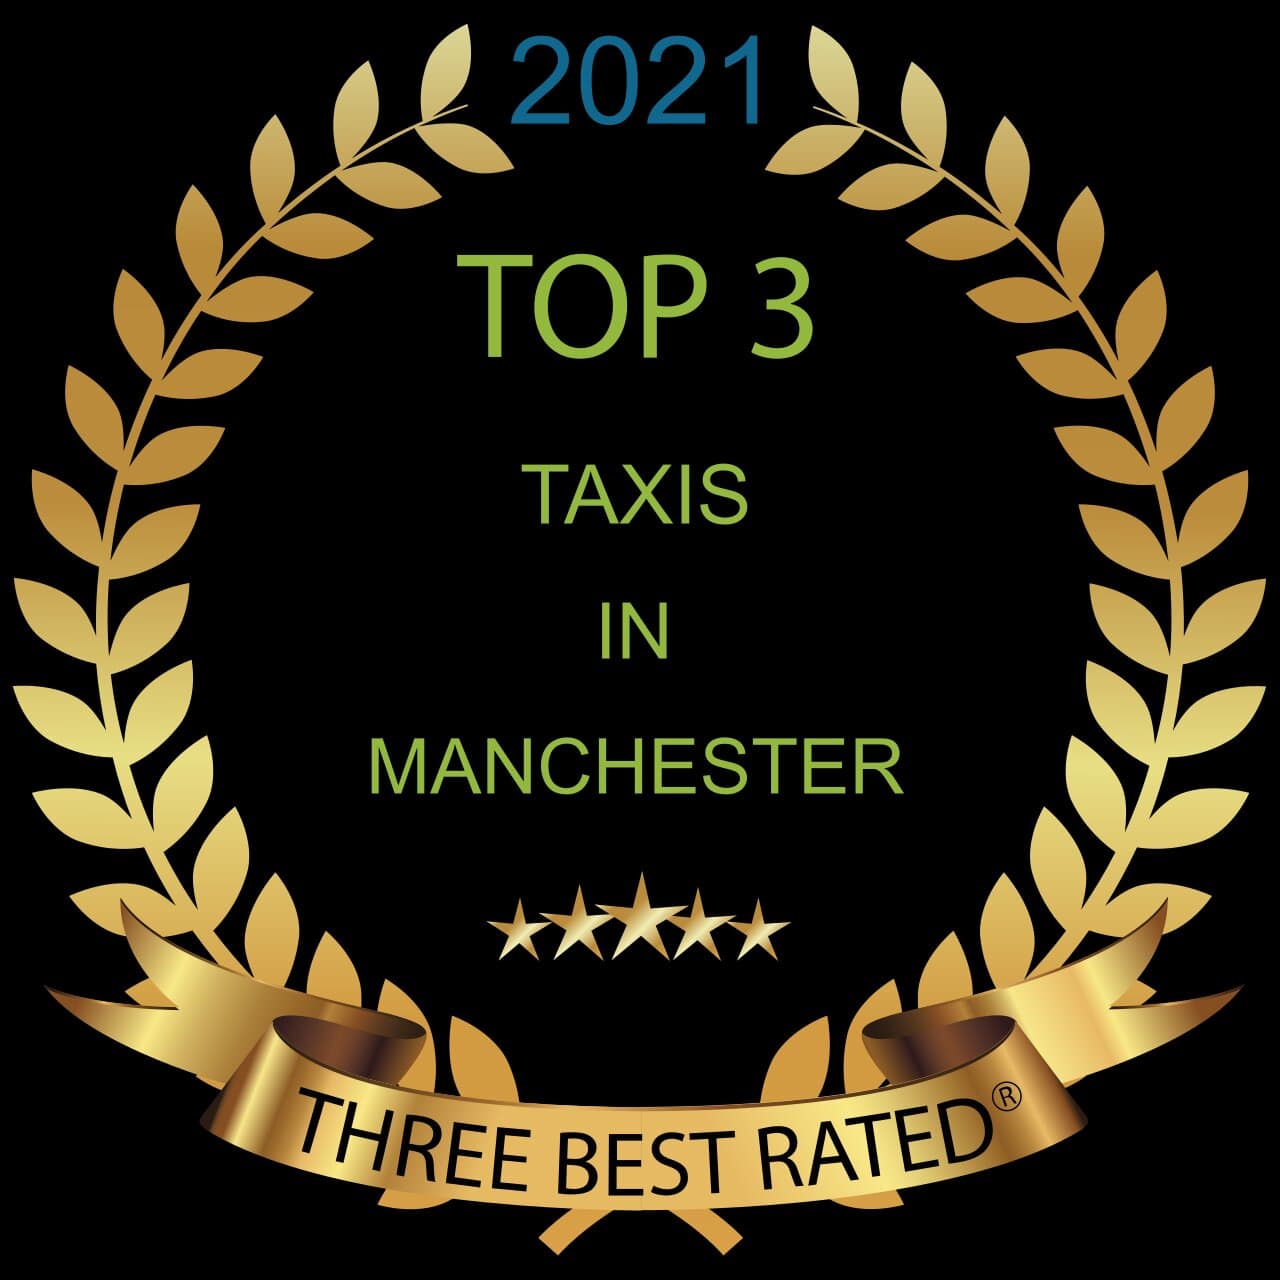 https://threebestrated.co.uk/taxis-in-manchester